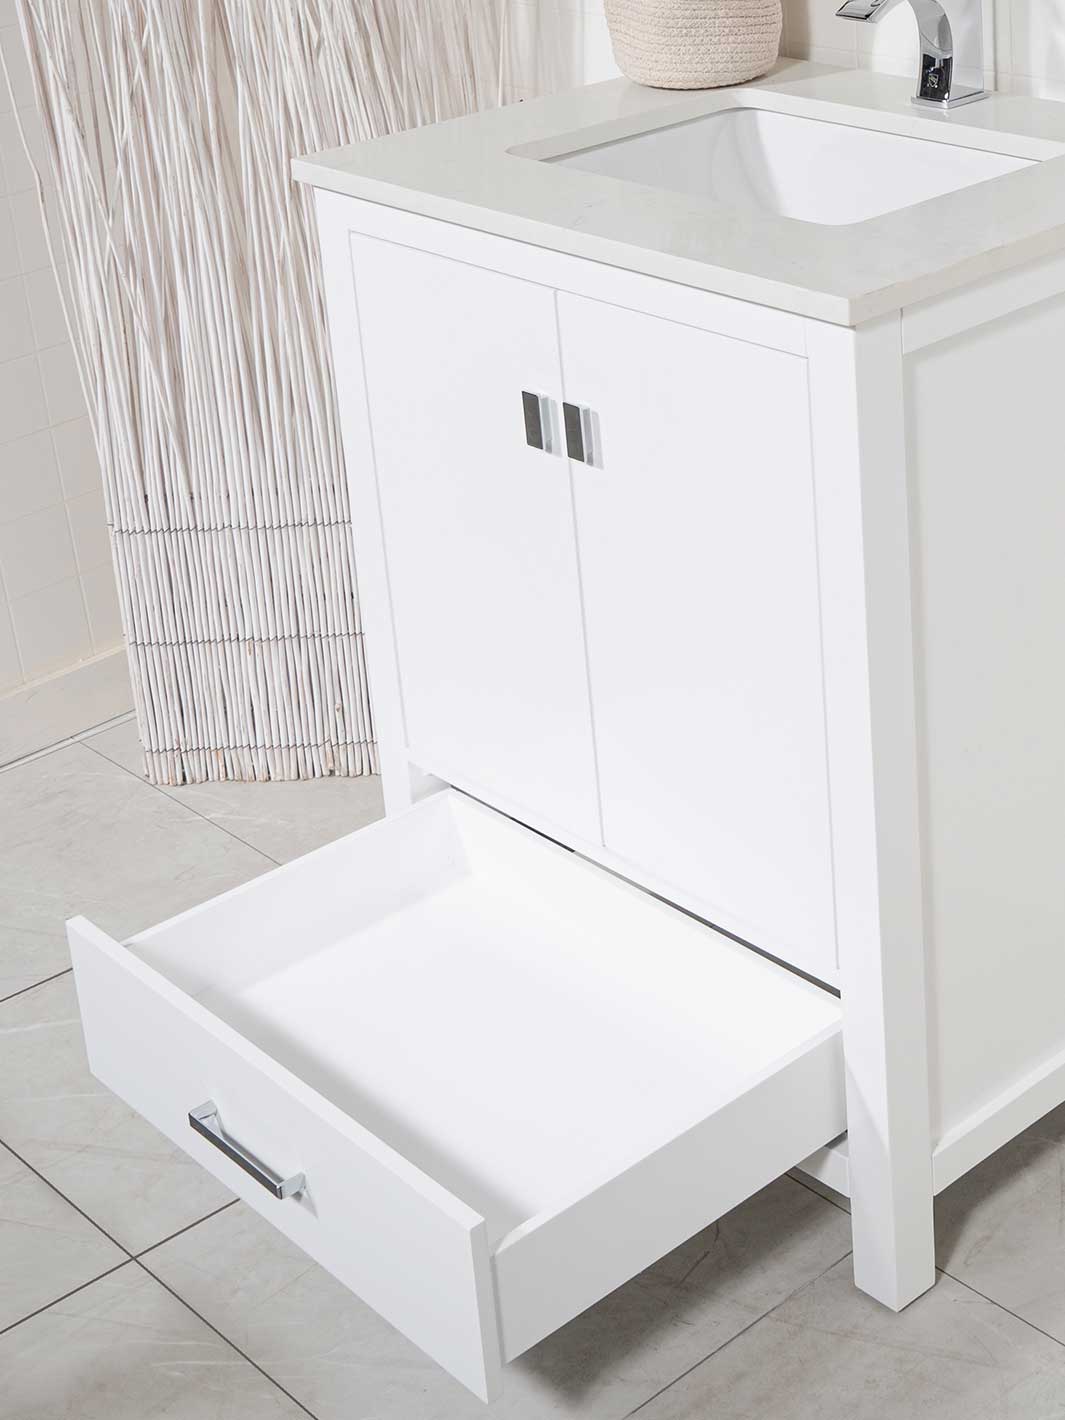 28 inch white bathroom cabinet with double shelving under sink, and bottom drawer